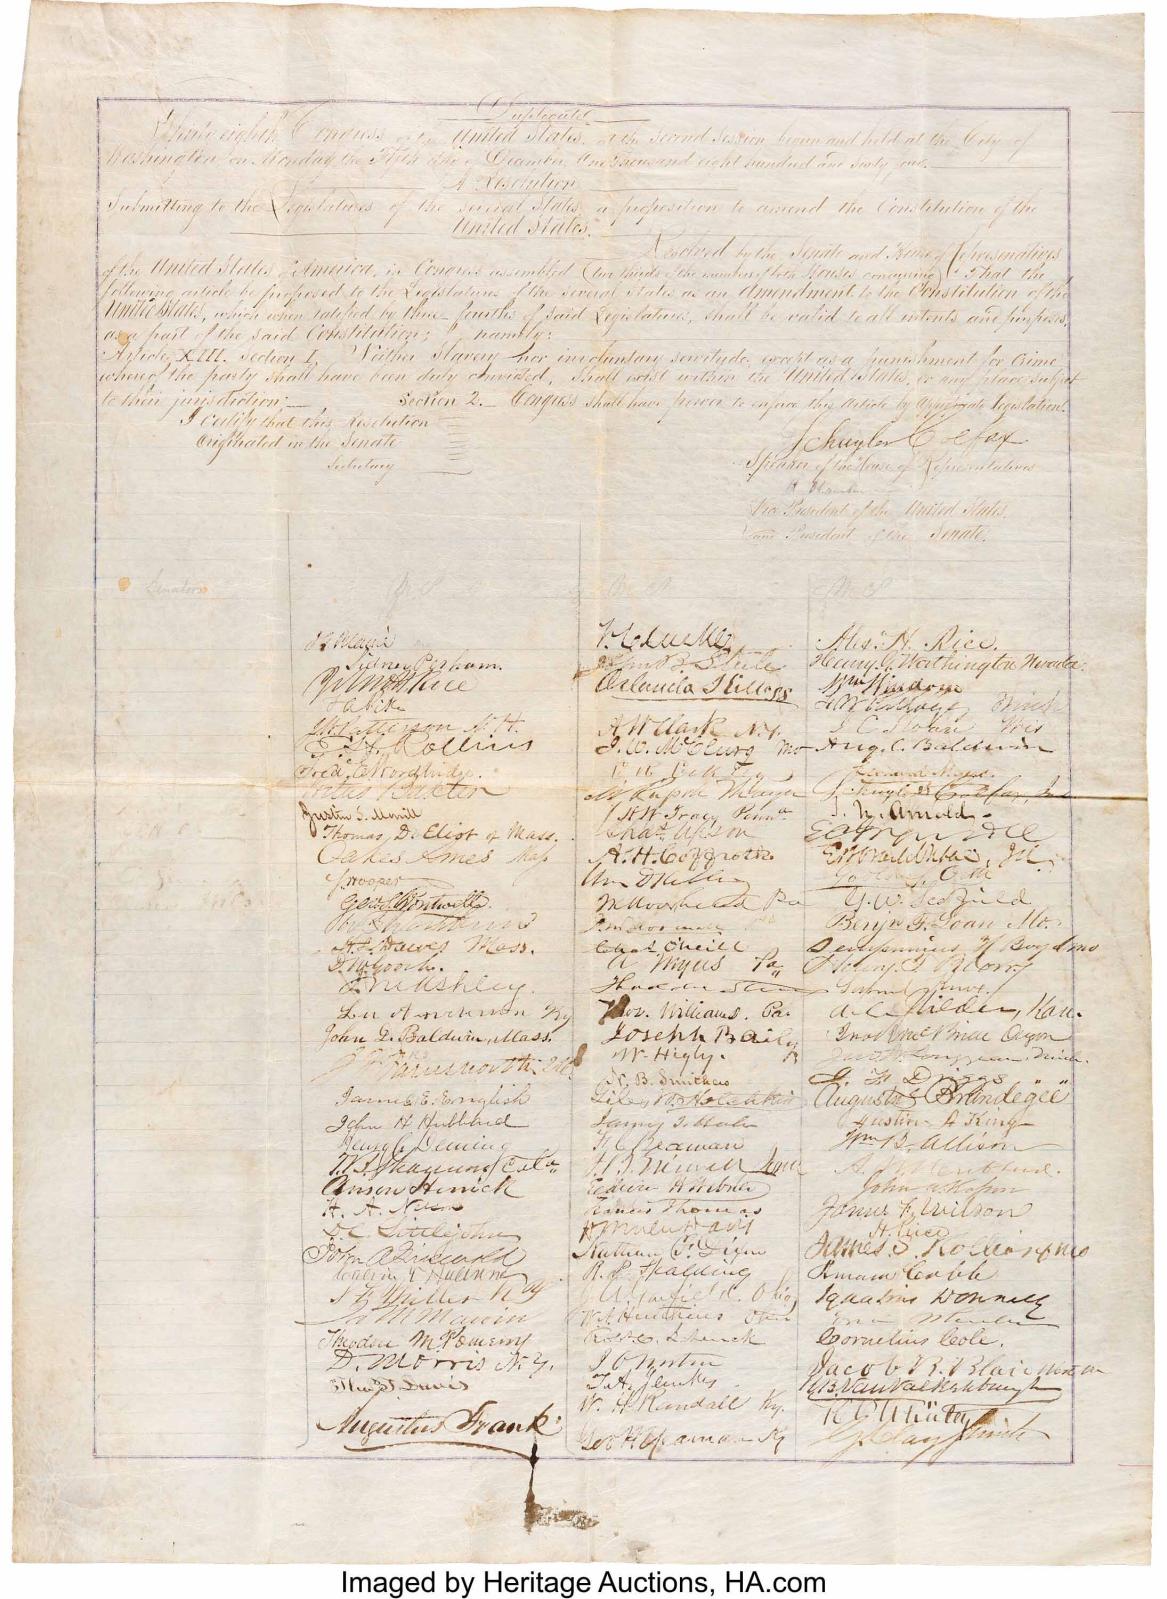 Original draft manuscript petition of the Thirteenth Amendment to the United States Constitution signed by over 109 members of Congress, 1